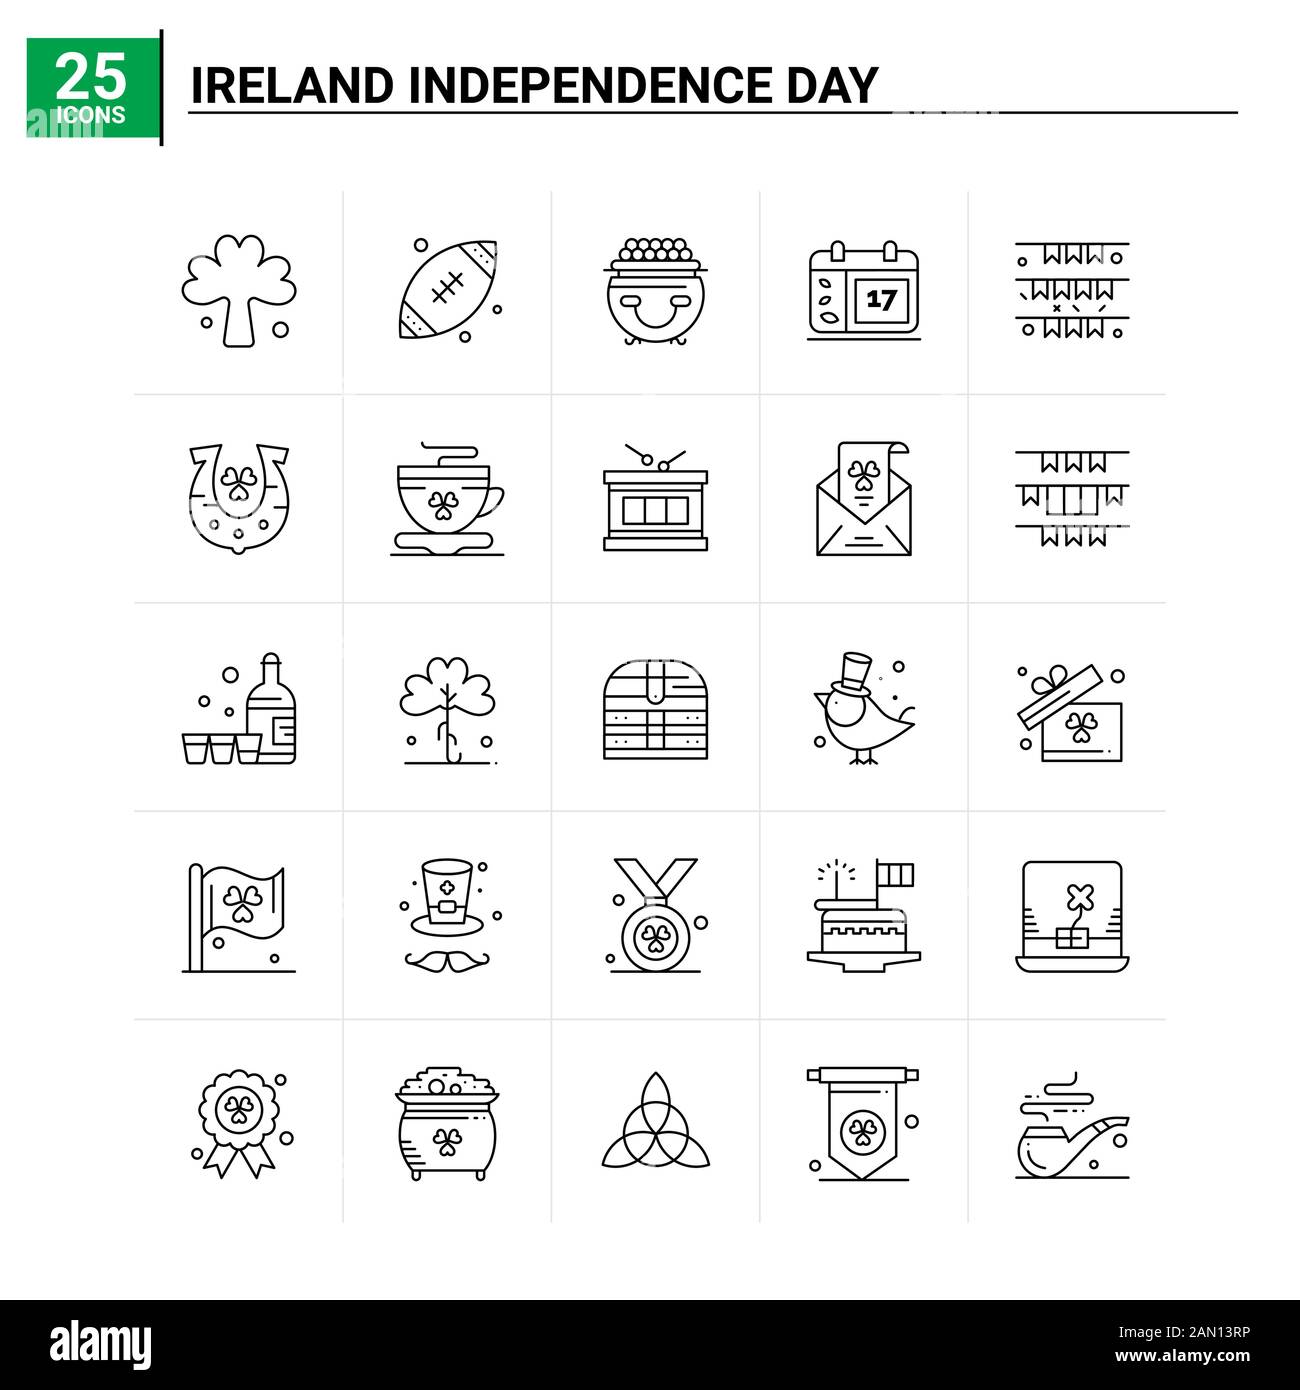 25 Ireland Independence Day icon set. vector background Stock Vector